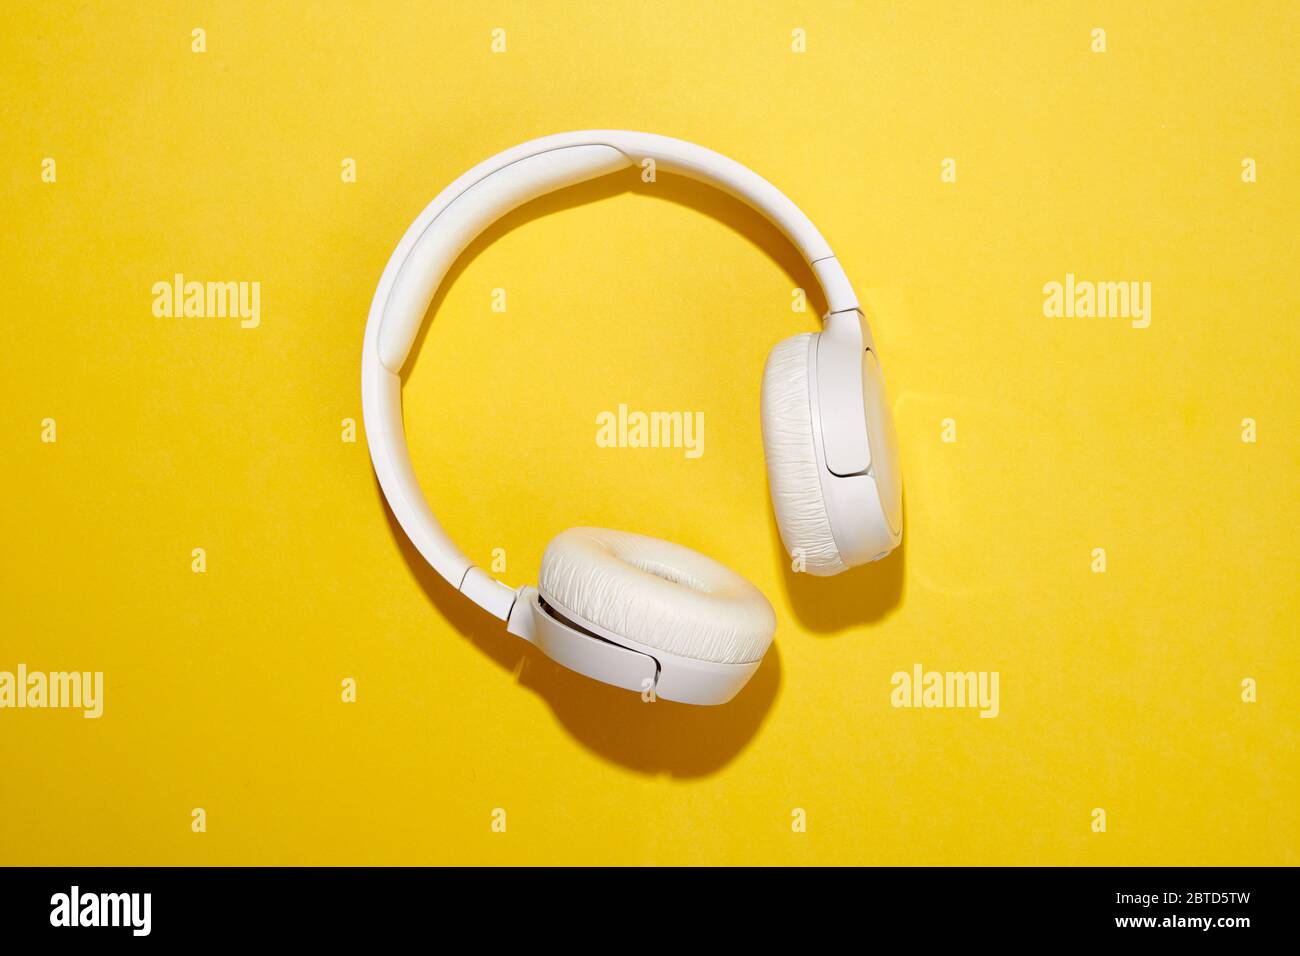 Pair of white stereo headphones on a yellow background with shadow place in the center Stock Photo